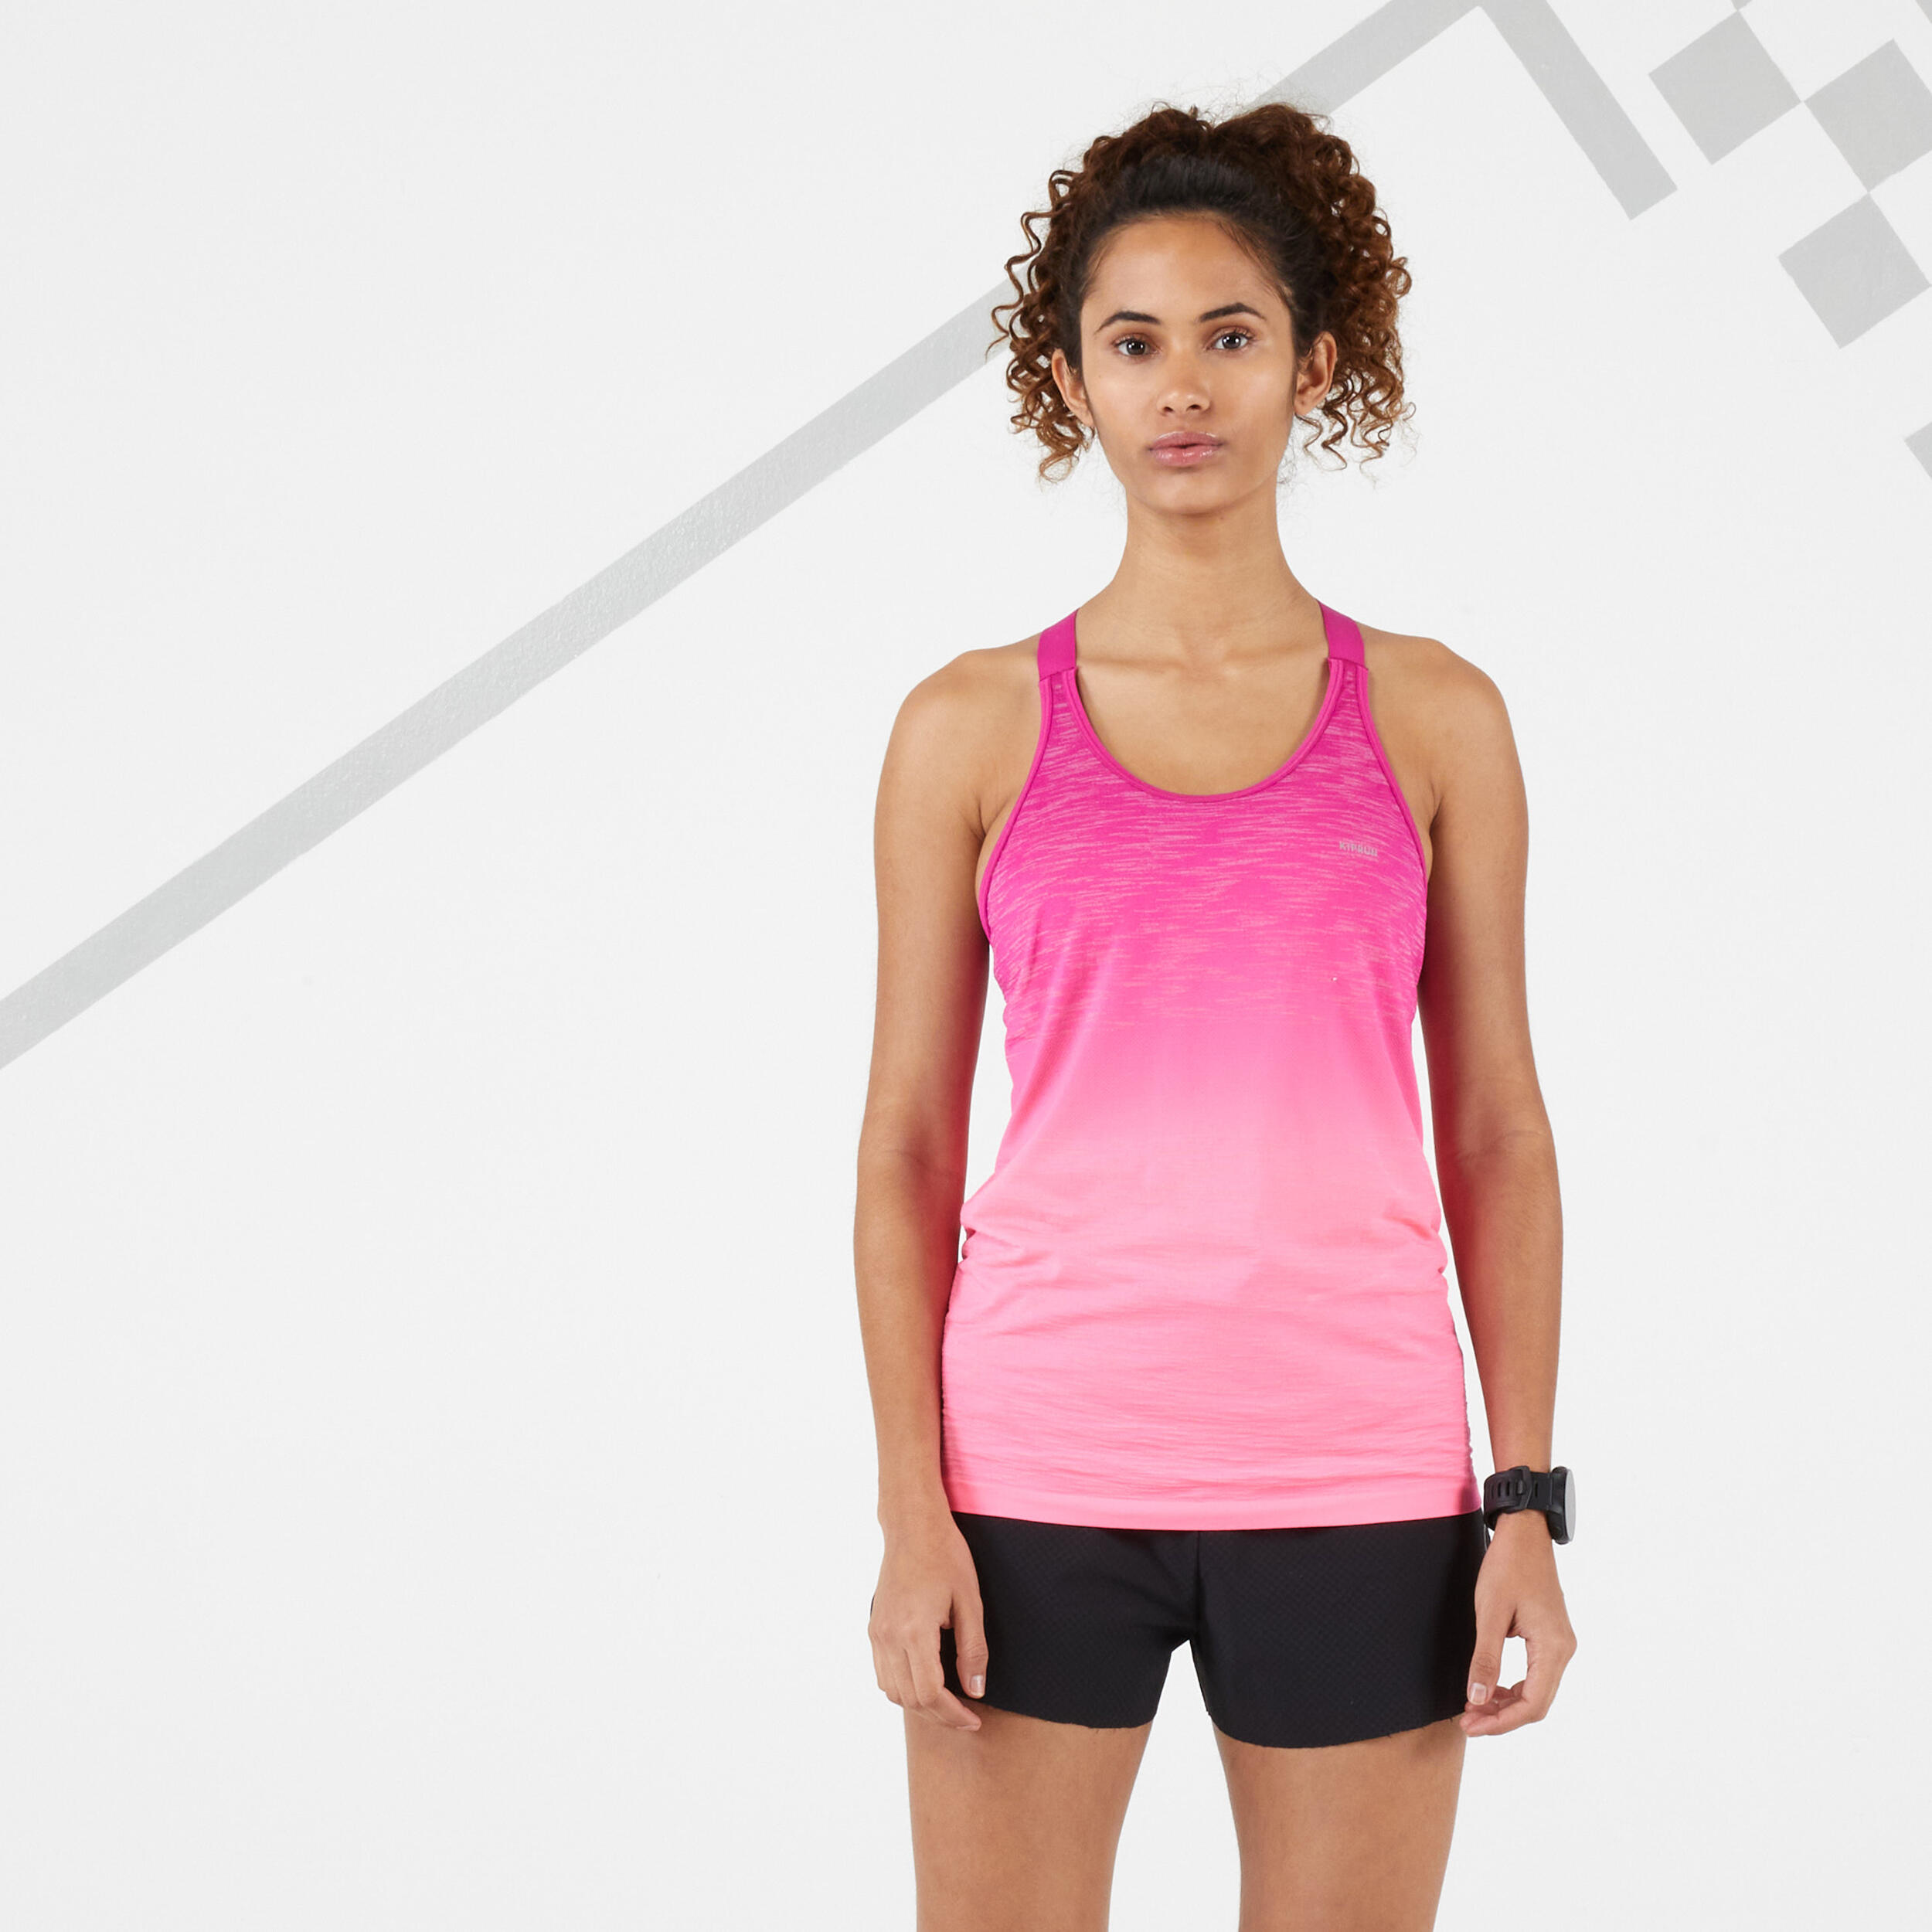 KIPRUN KIPRUN CARE RUNNING TANK TOP WITH BUILT-IN BRA - WASHED-OUT PINK